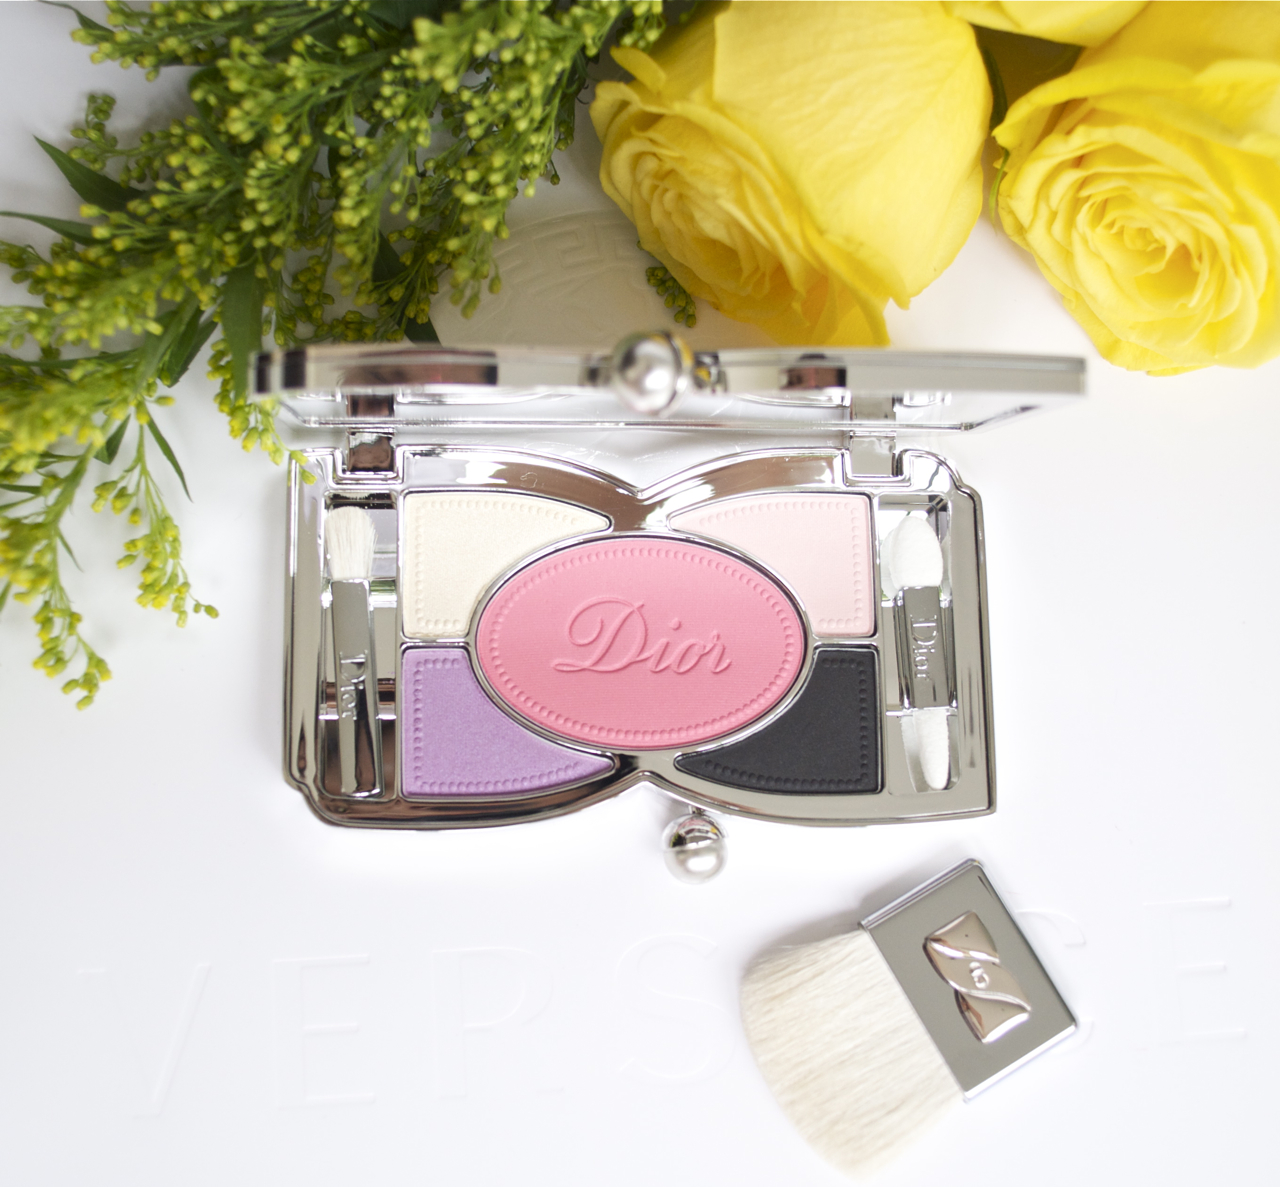 Dior Trianon Spring Makeup Collection 2014 (First Look)